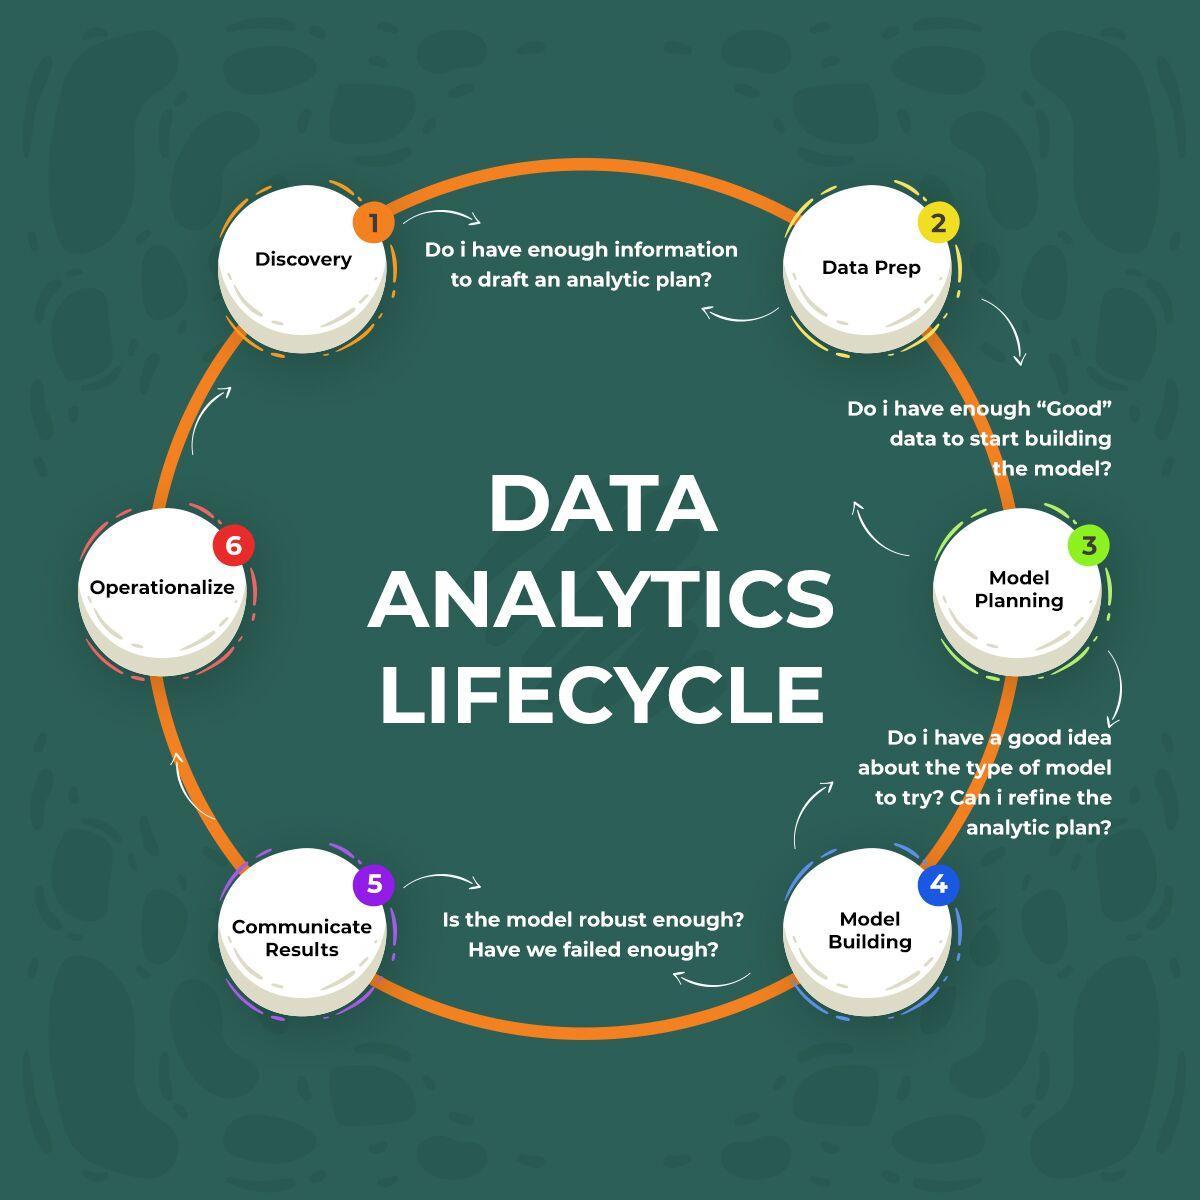 why data analysis in research is important